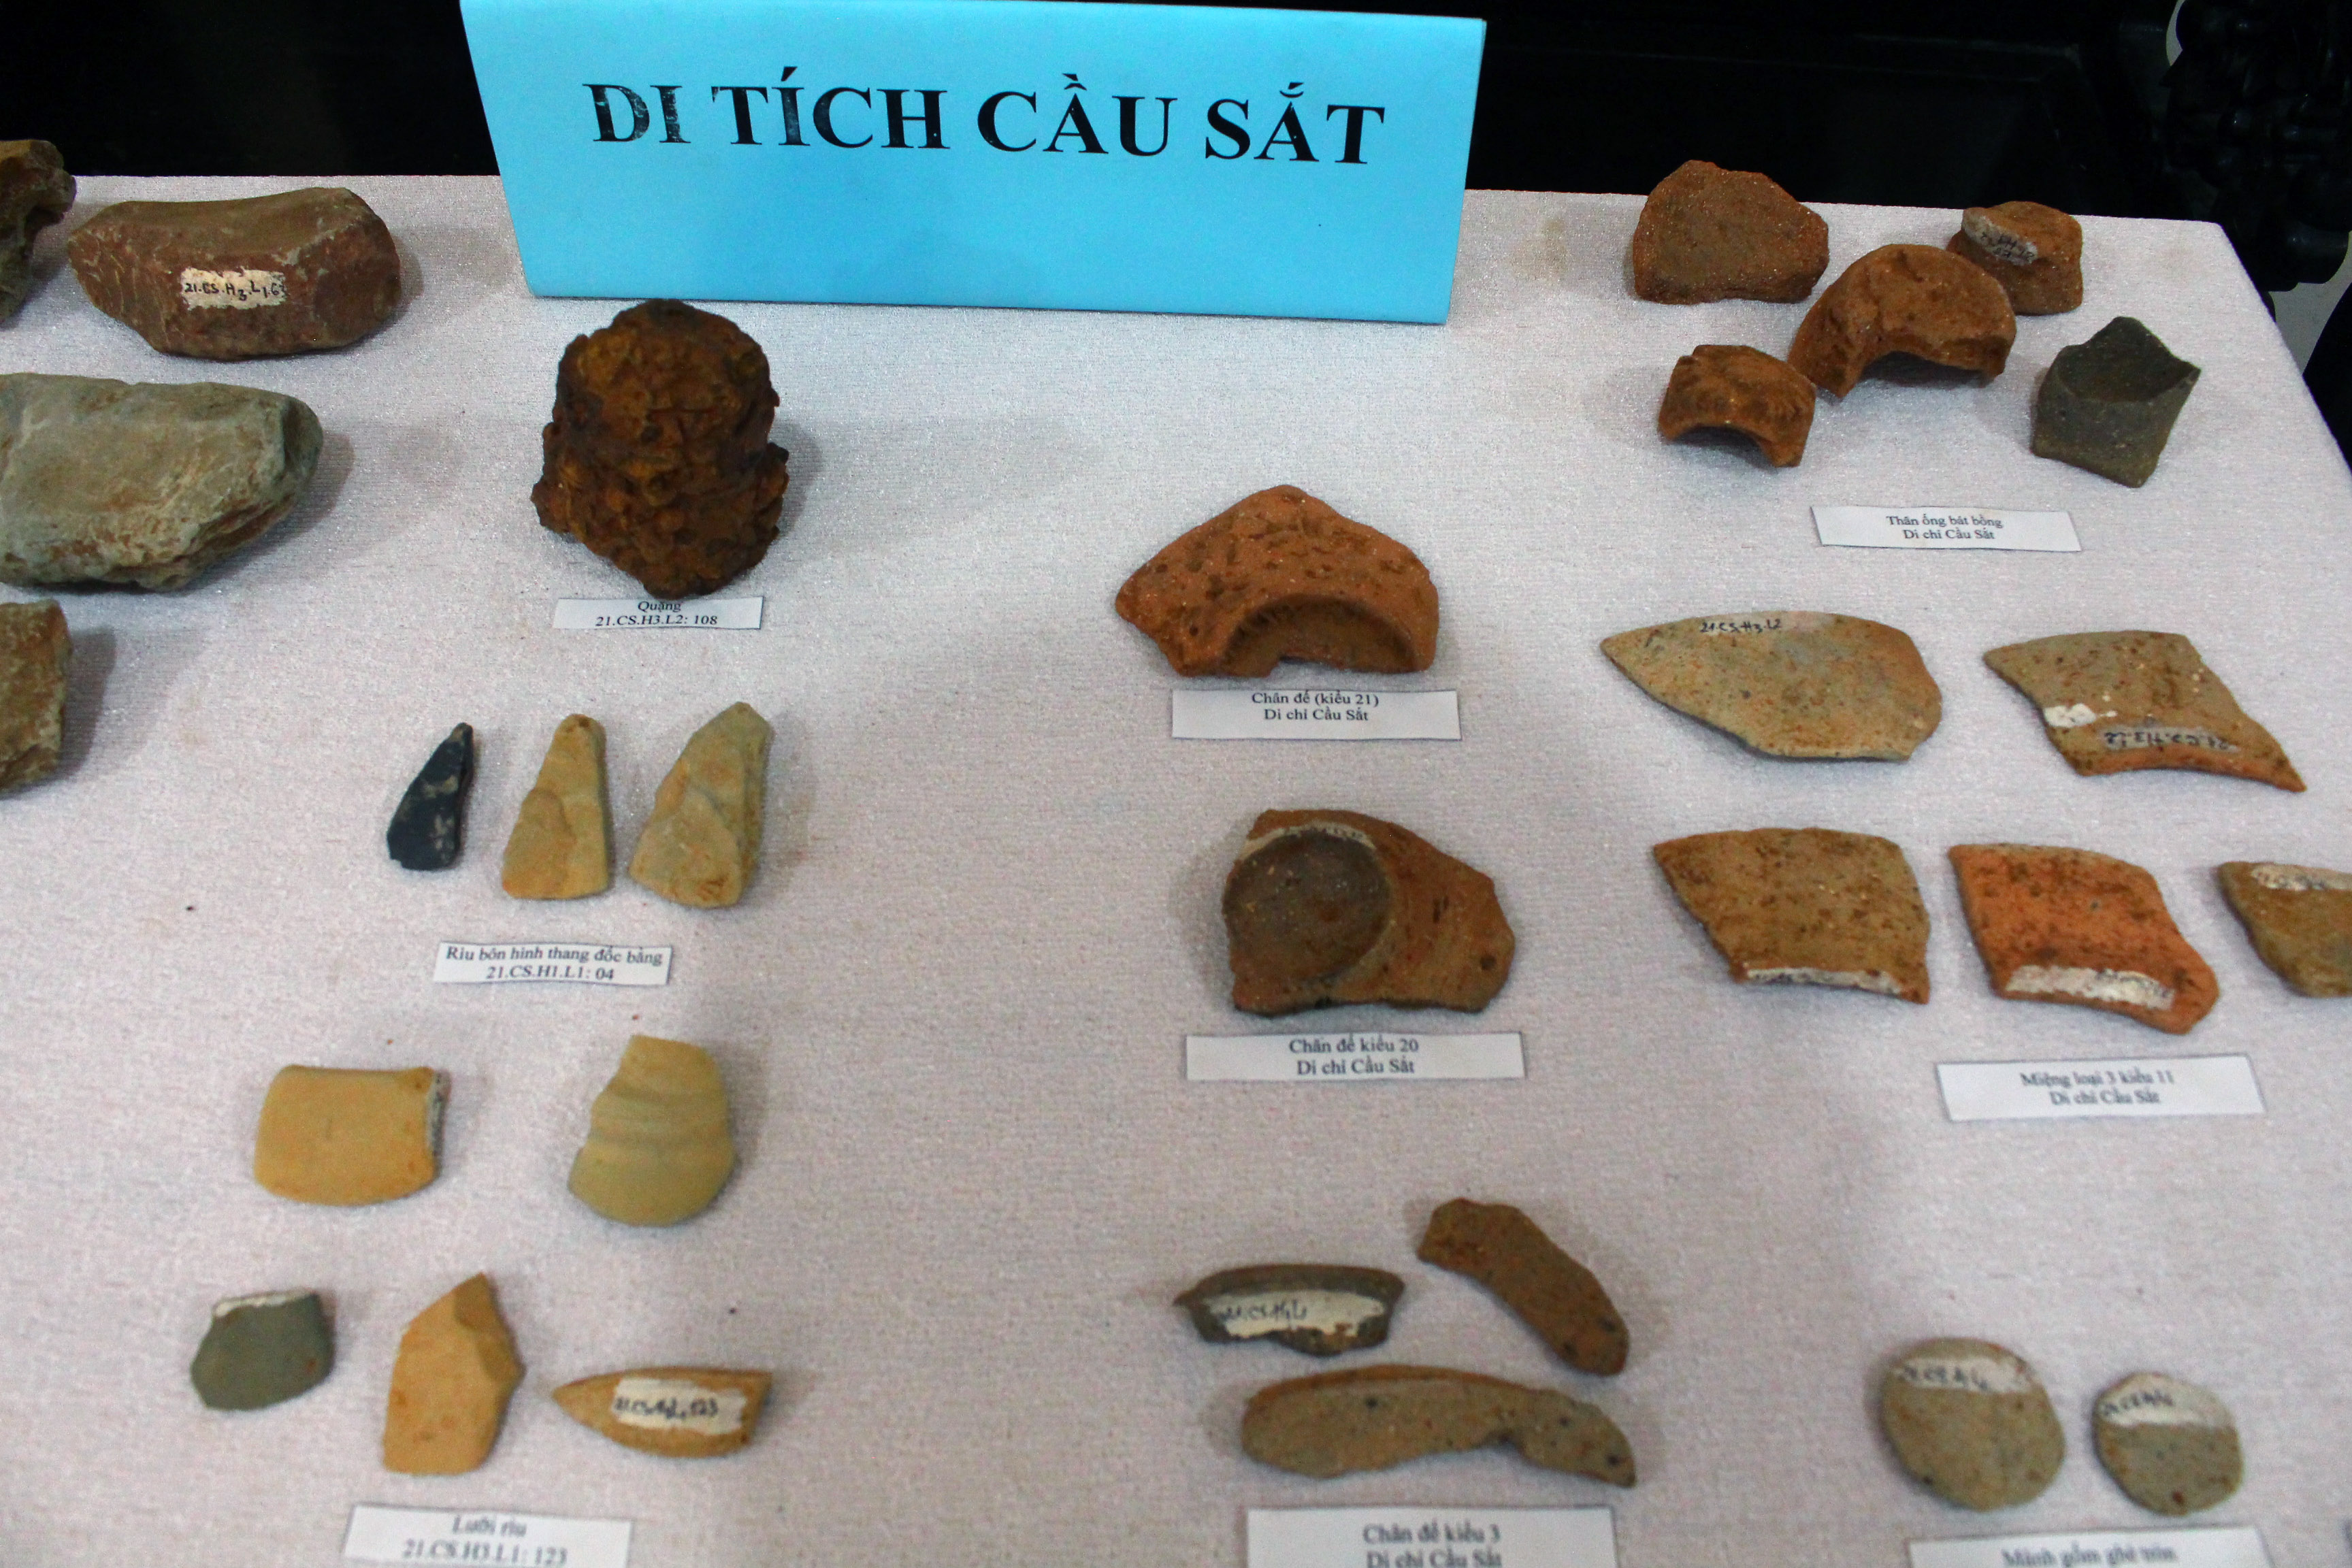 Over 6,200 artifacts dating back thousands of years on display in southern Vietnam